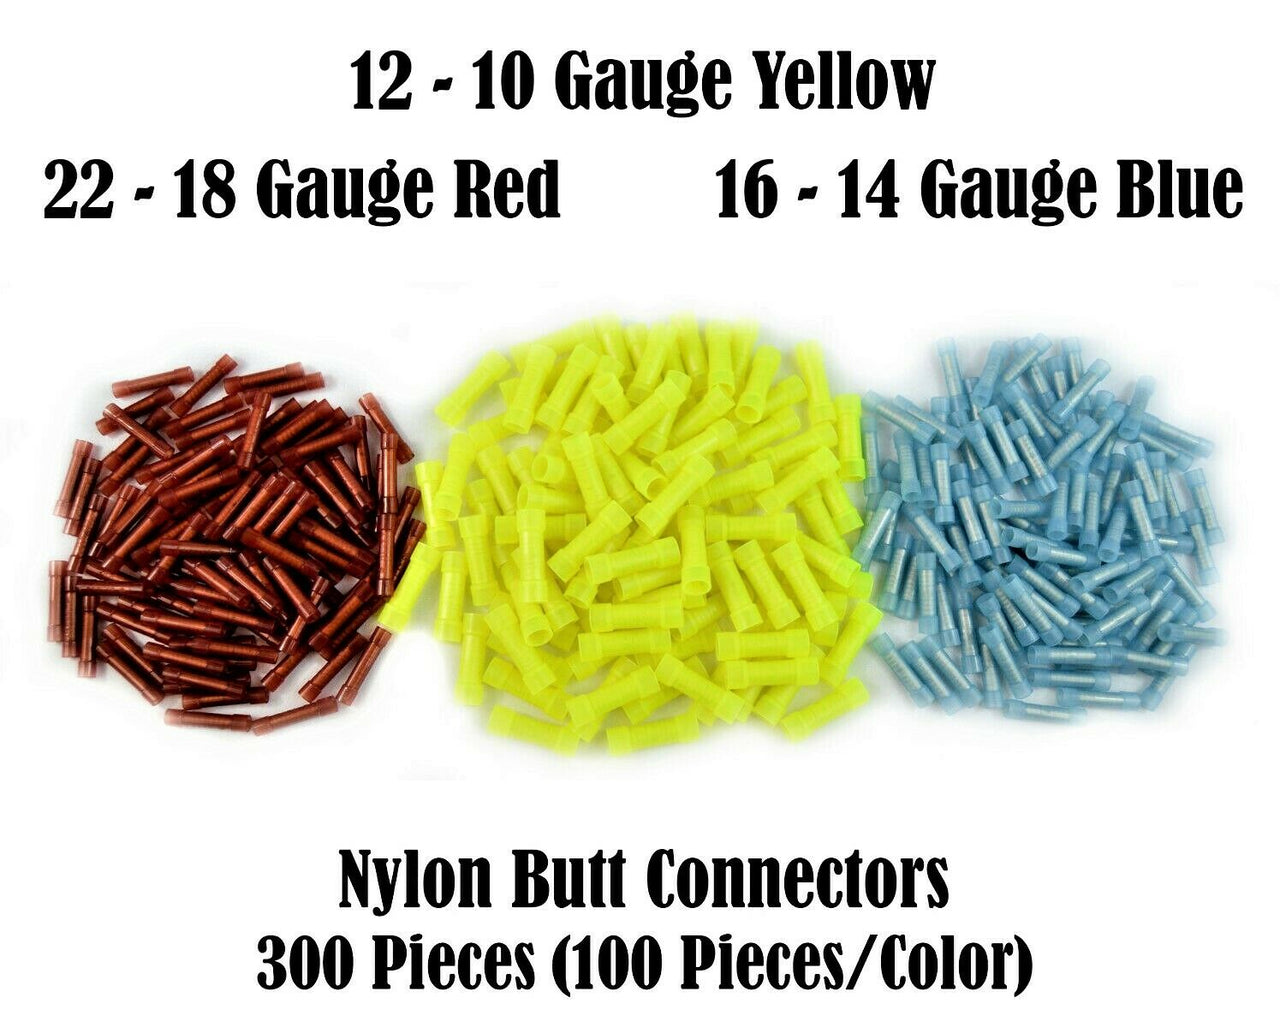 300Pcs American Terminal Butt Connectors Yellow, Blue, And Red NYLON 12-10, 16-14, And 22-18 Gauge Crimp Type (100 of each)